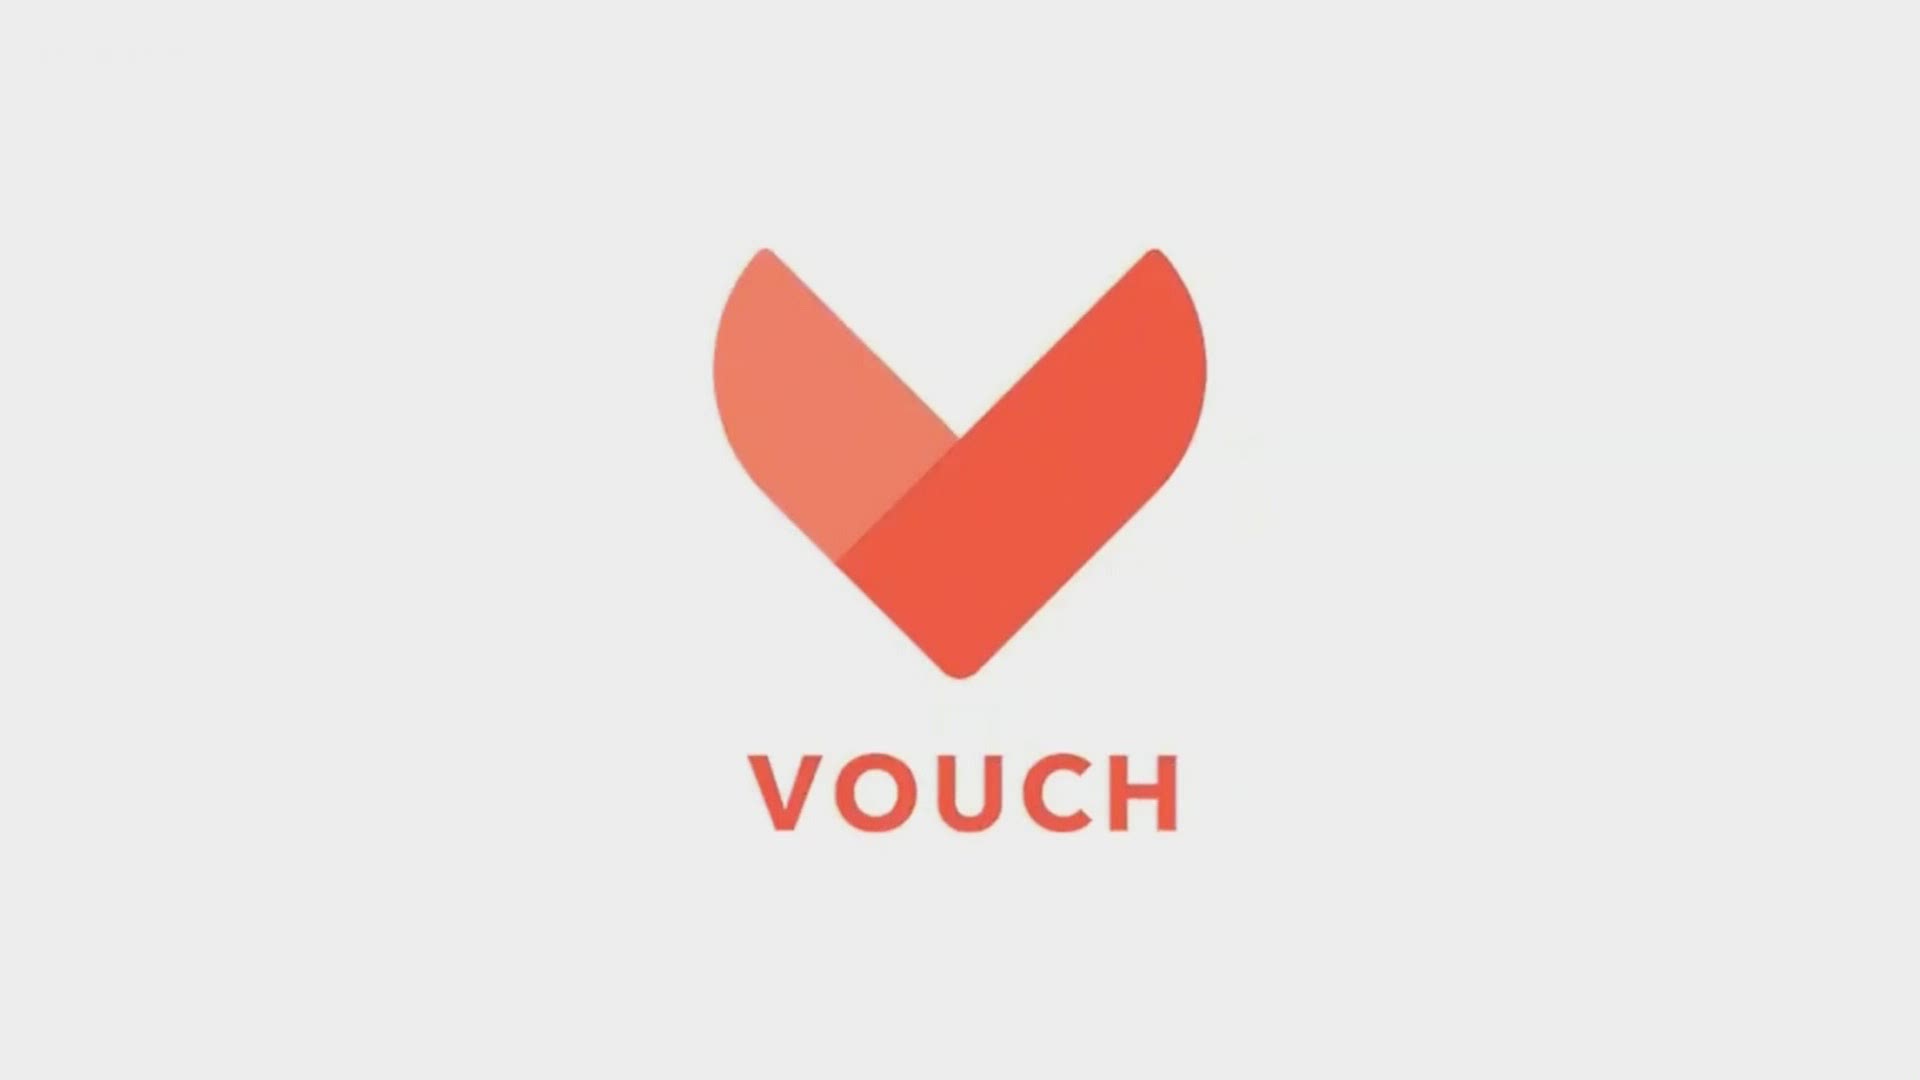 Online or in-person, Vouch CEO Christina Yebra reminds users that connecting comes back to effort.